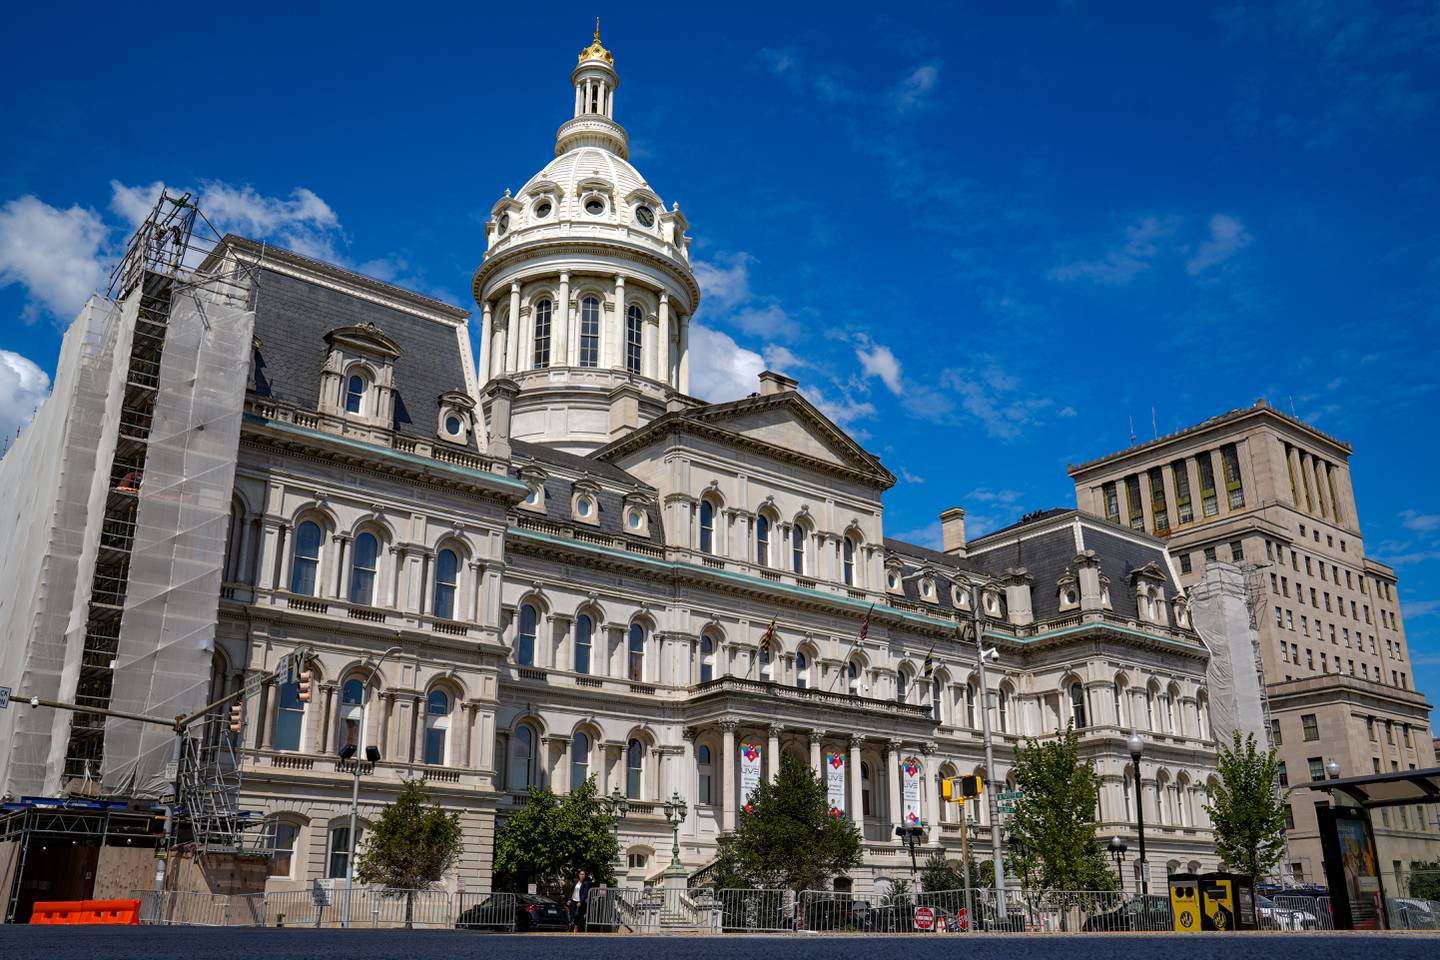 The exterior of Baltimore City Hall on August 17, 2022.